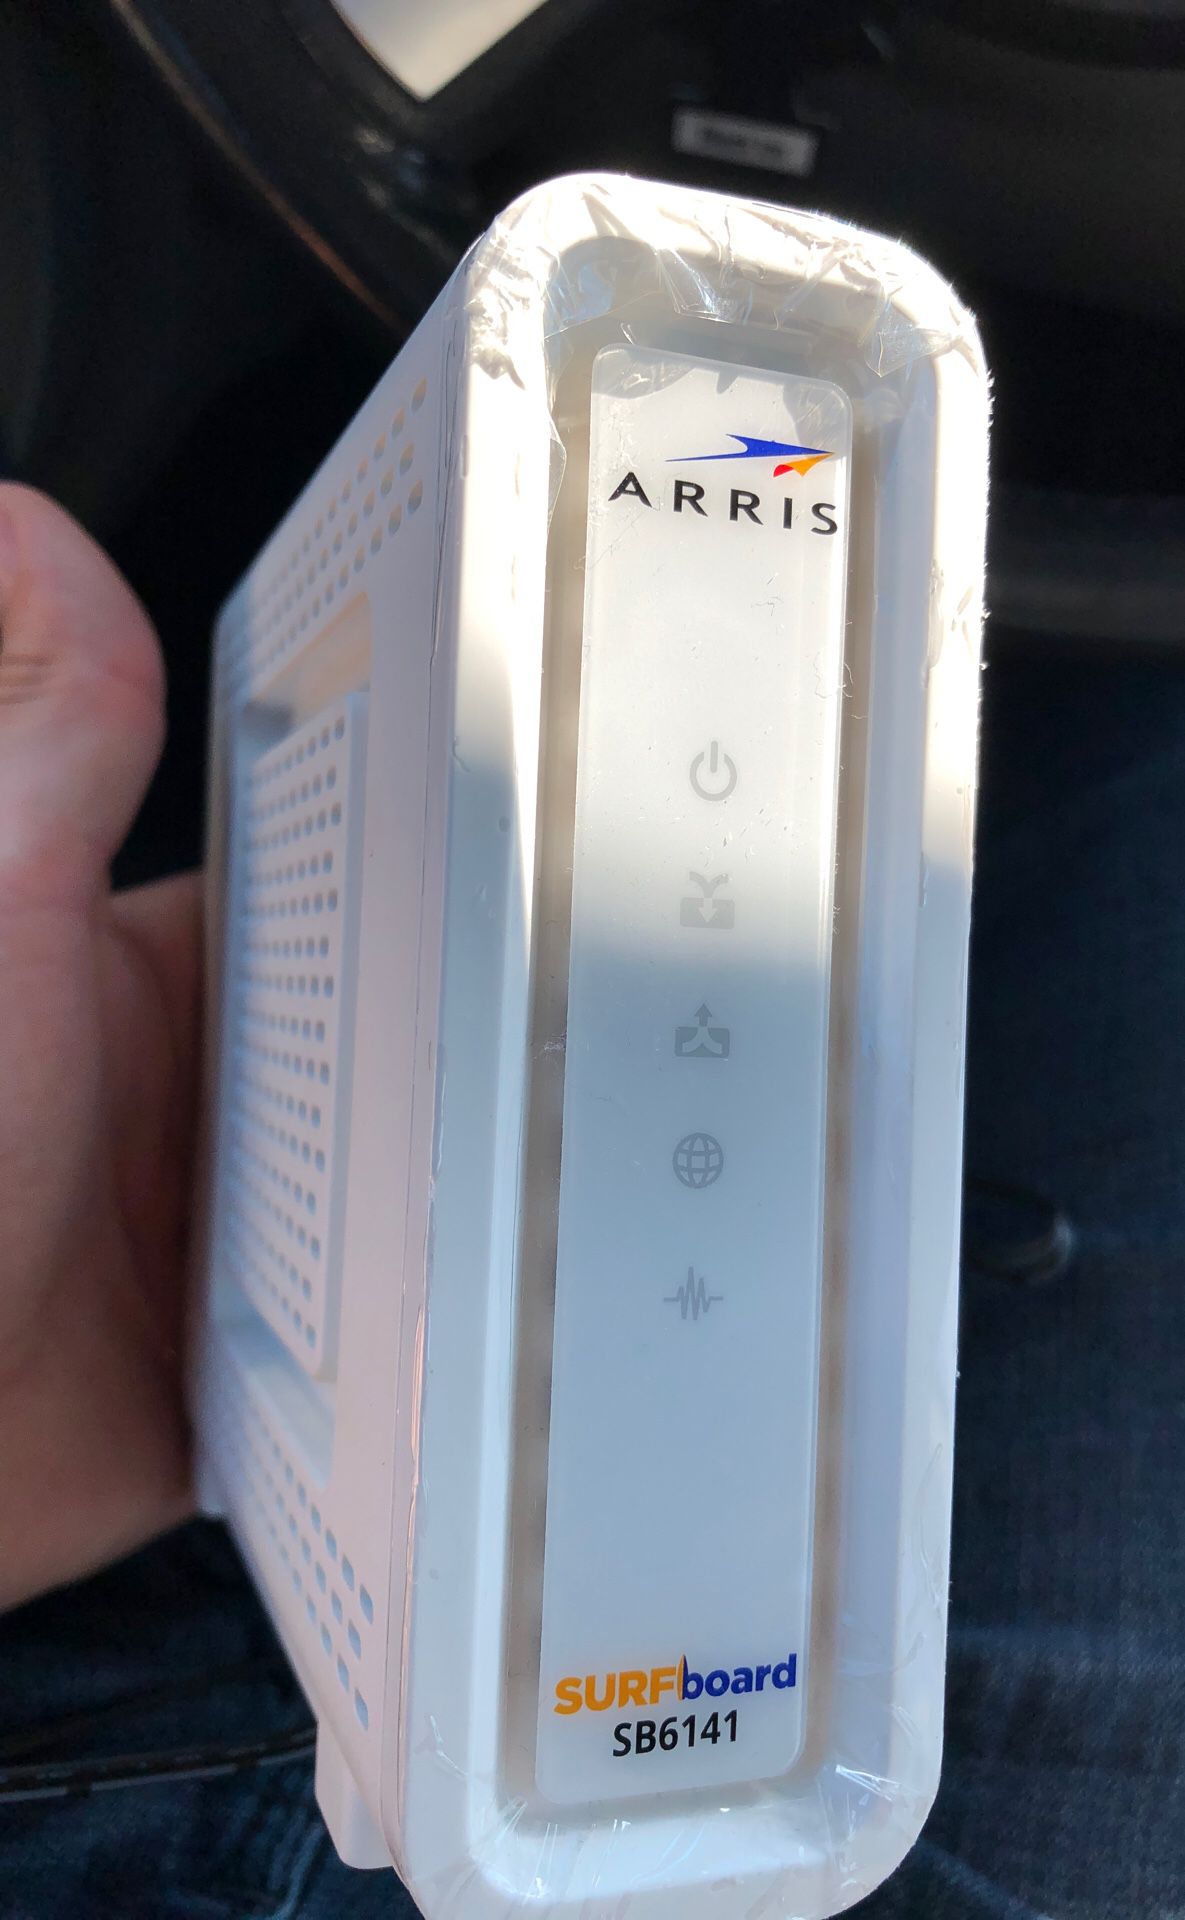 Arris modem router for WiFi